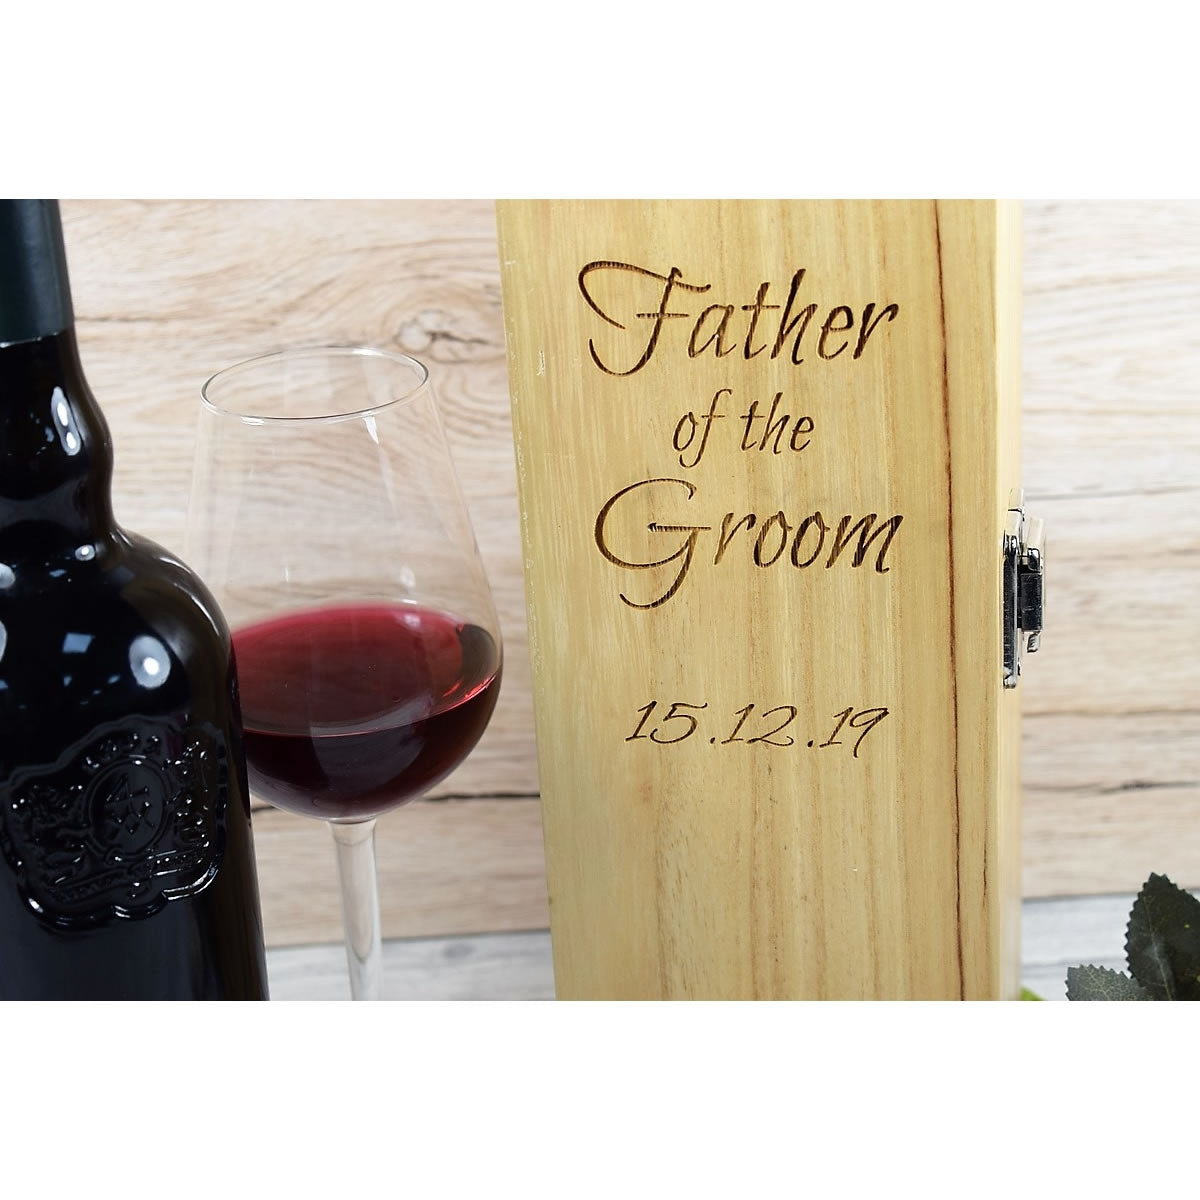 Personalised Wooden Wine Box - Wedding Party Gift